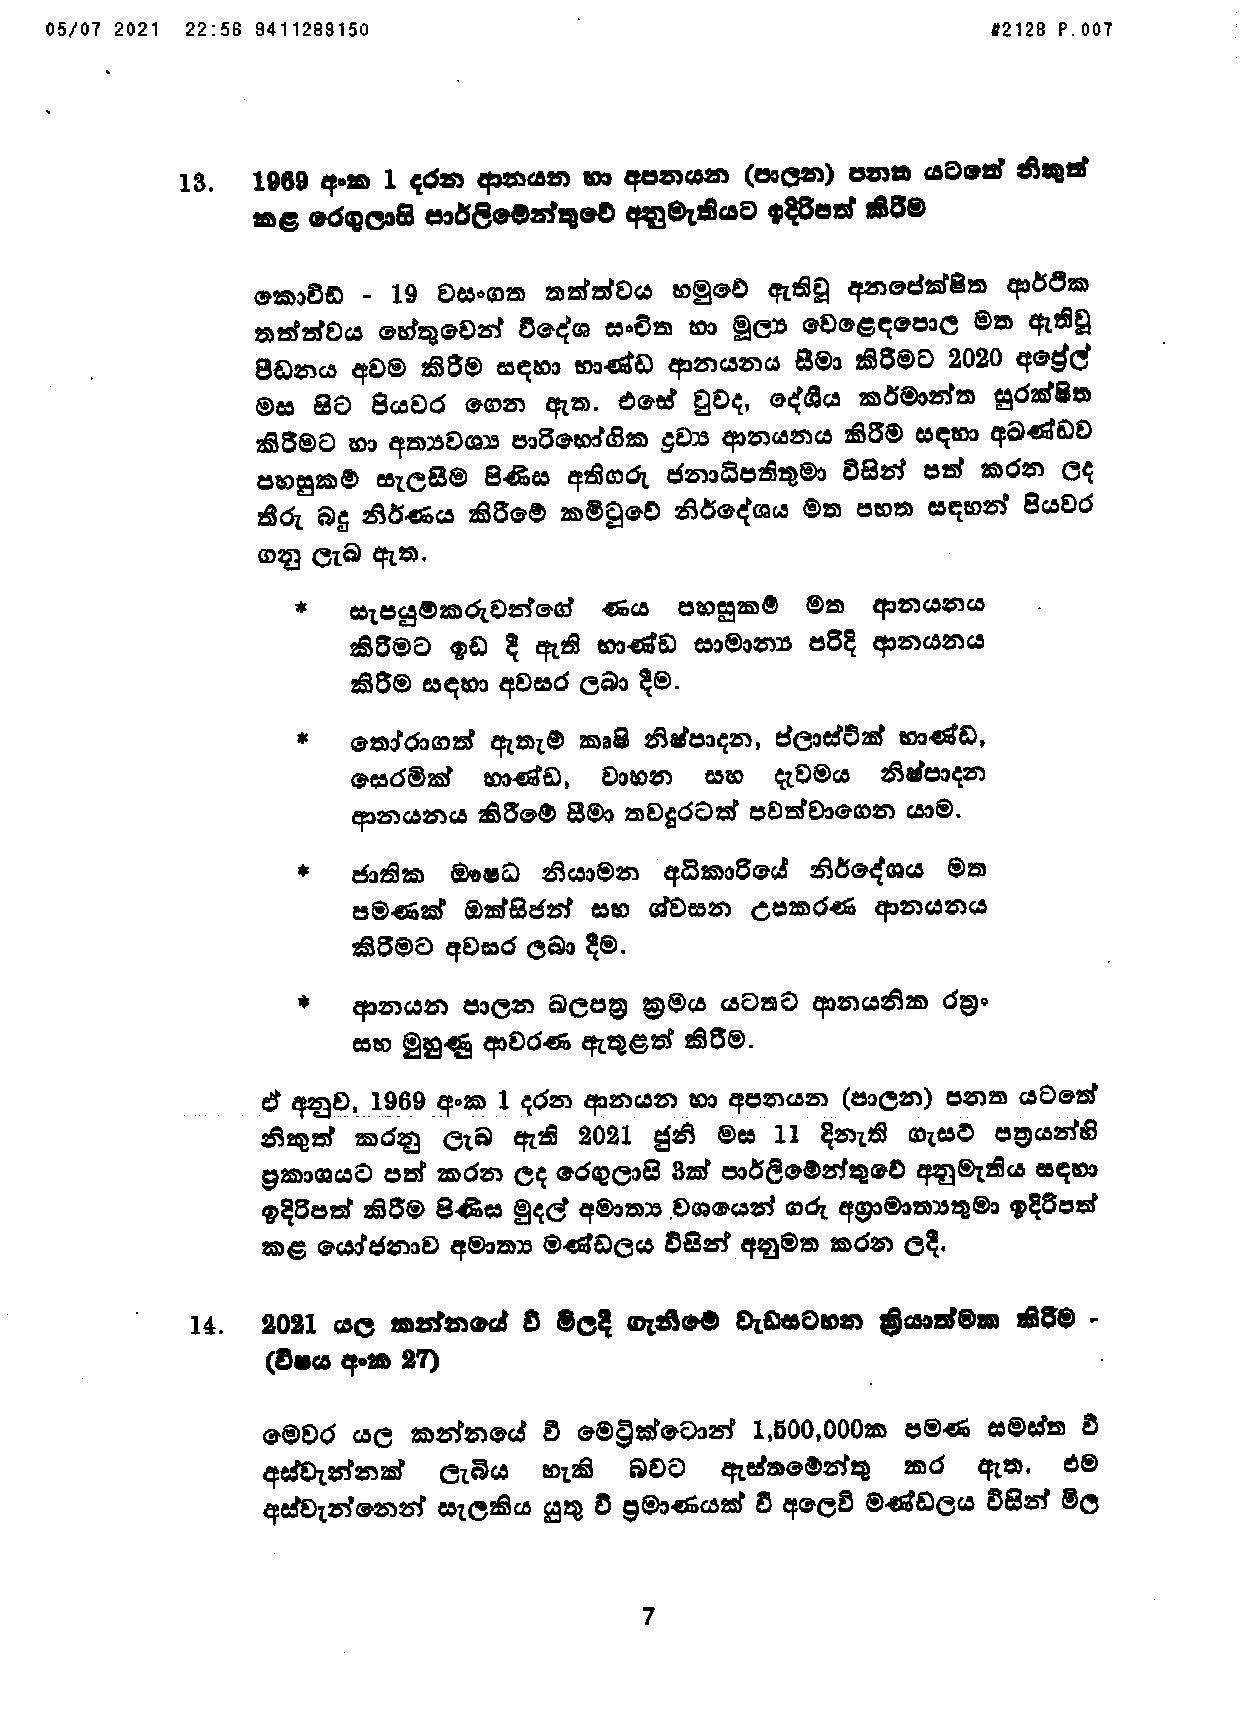 Cabinet Decision on 05.07.2021 page 007